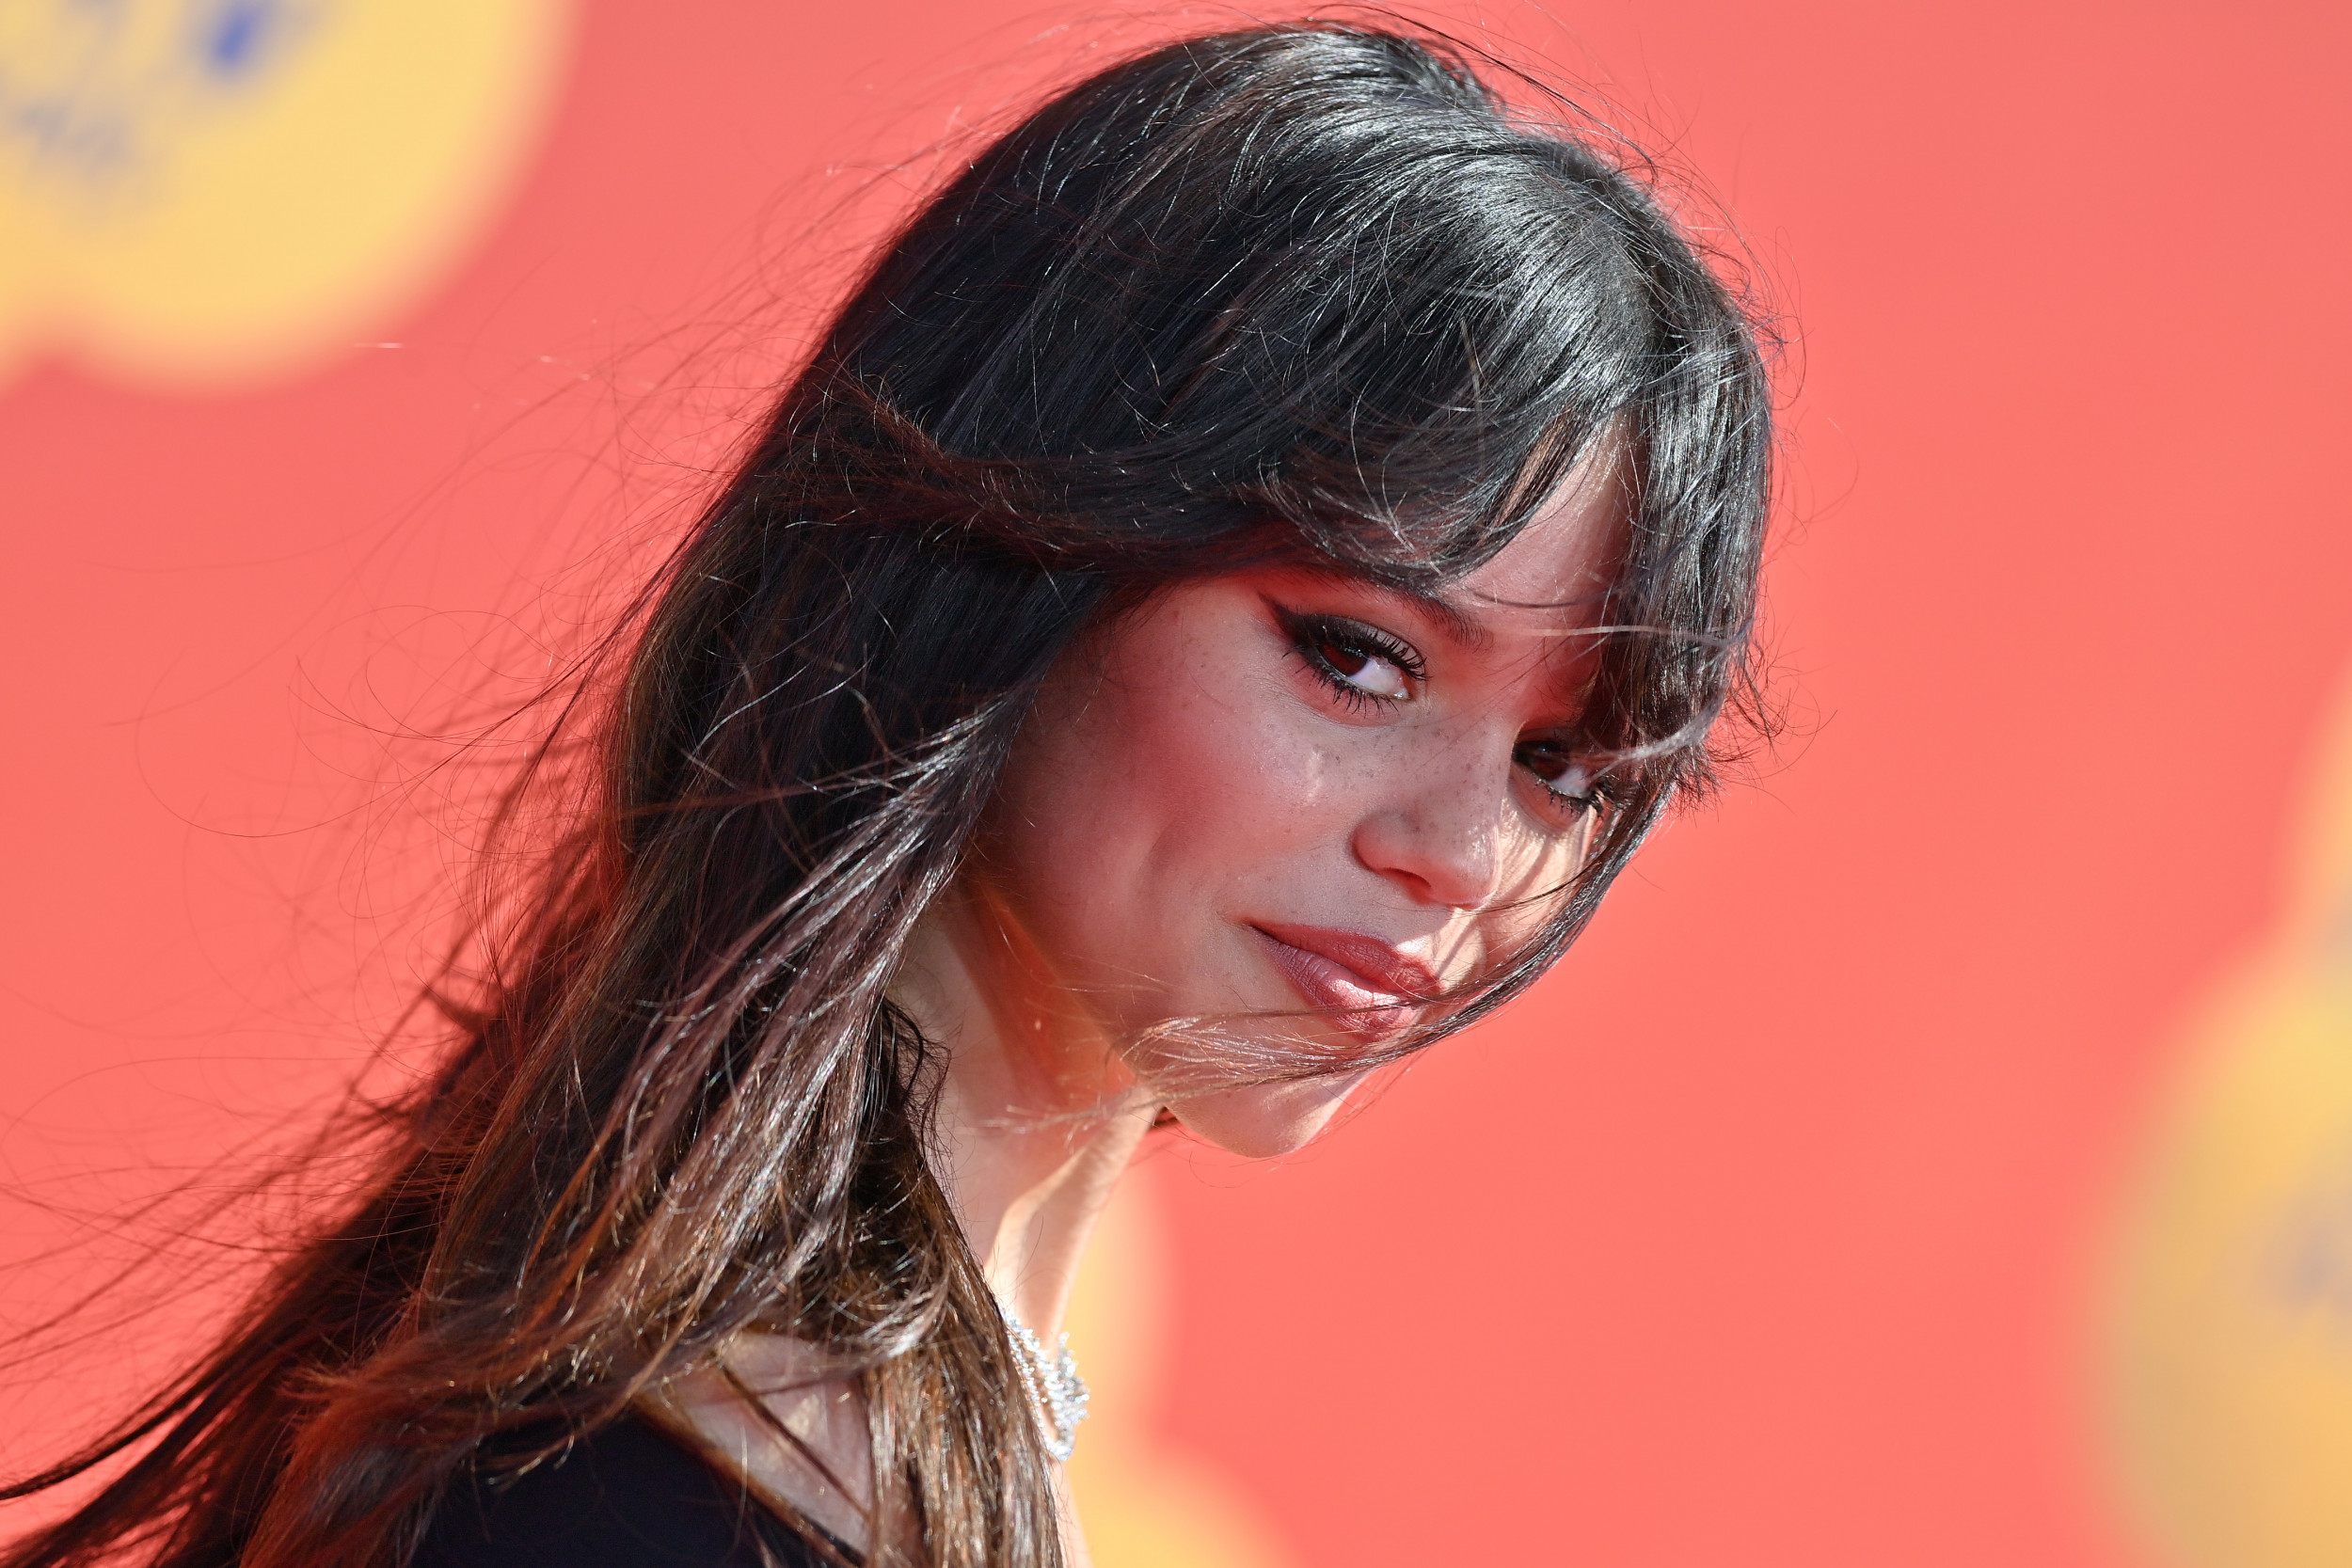 This is why everyone's talking about Jenna Ortega as Wednesday